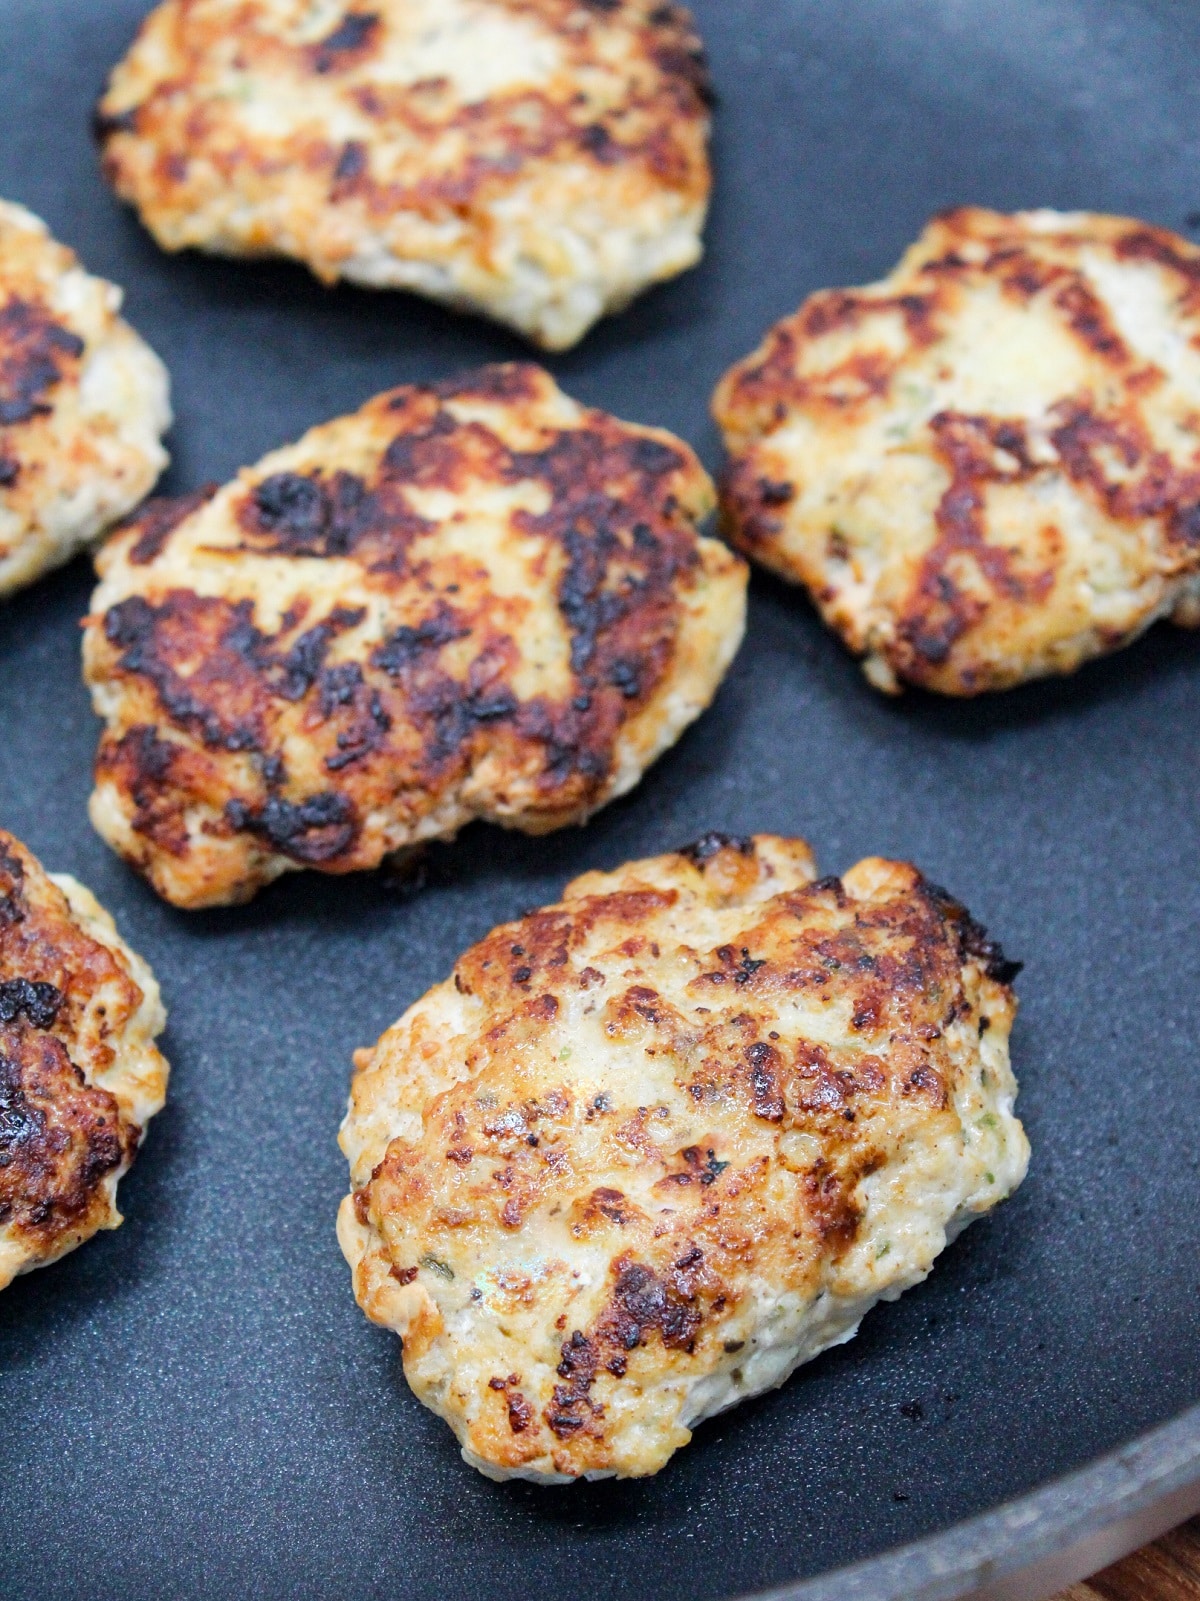 chicken formed into sausage patties. Cooked in a skillet till golden brown.